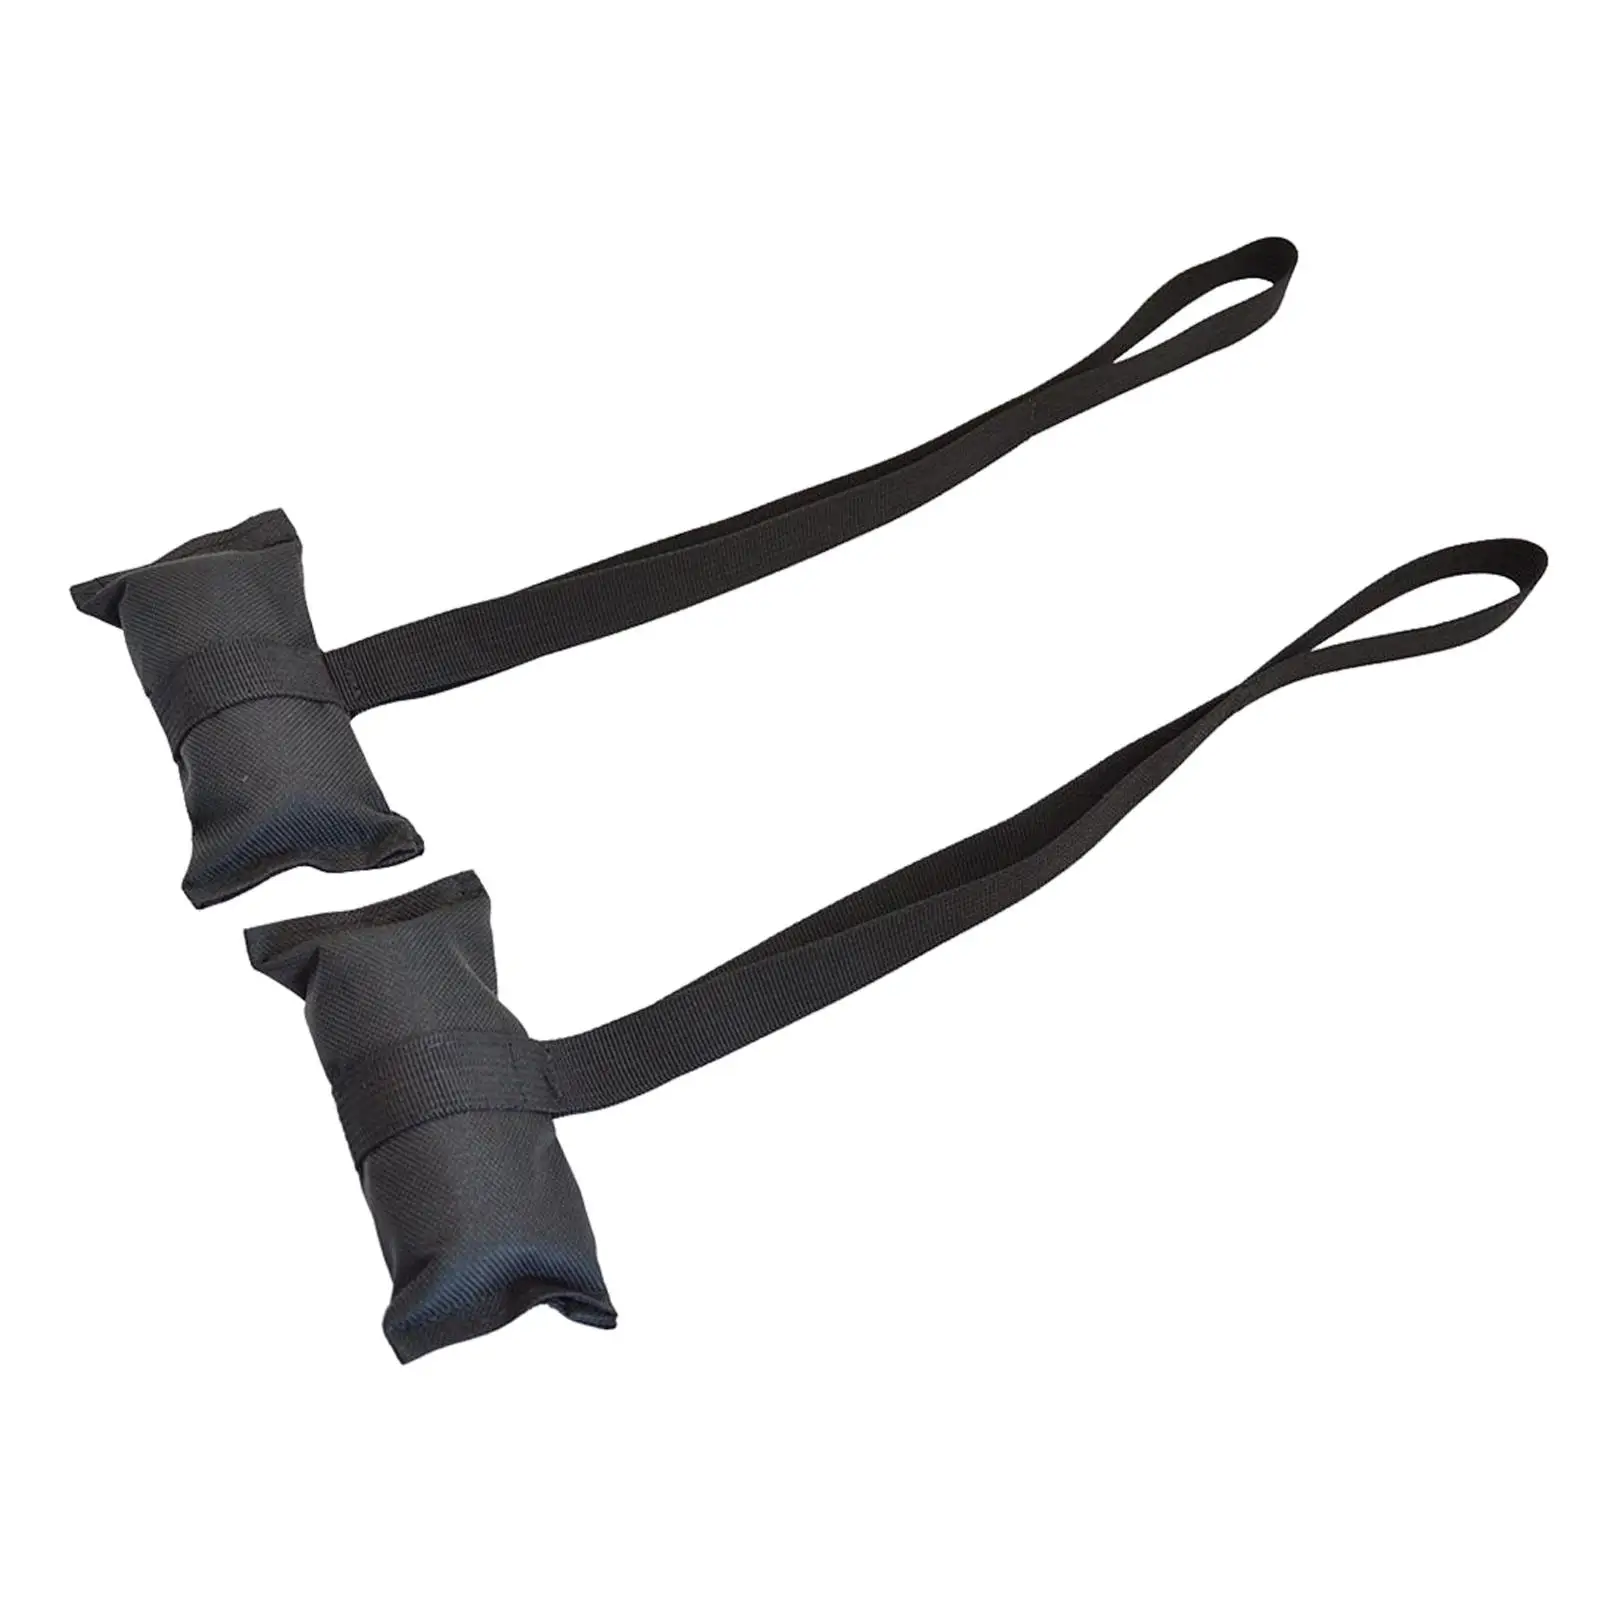 Canoe Anchors Anchor Straps Kayak Handles Easy Installation Disassembly Tie Down for Boat Accessories Kayak Car Hoods